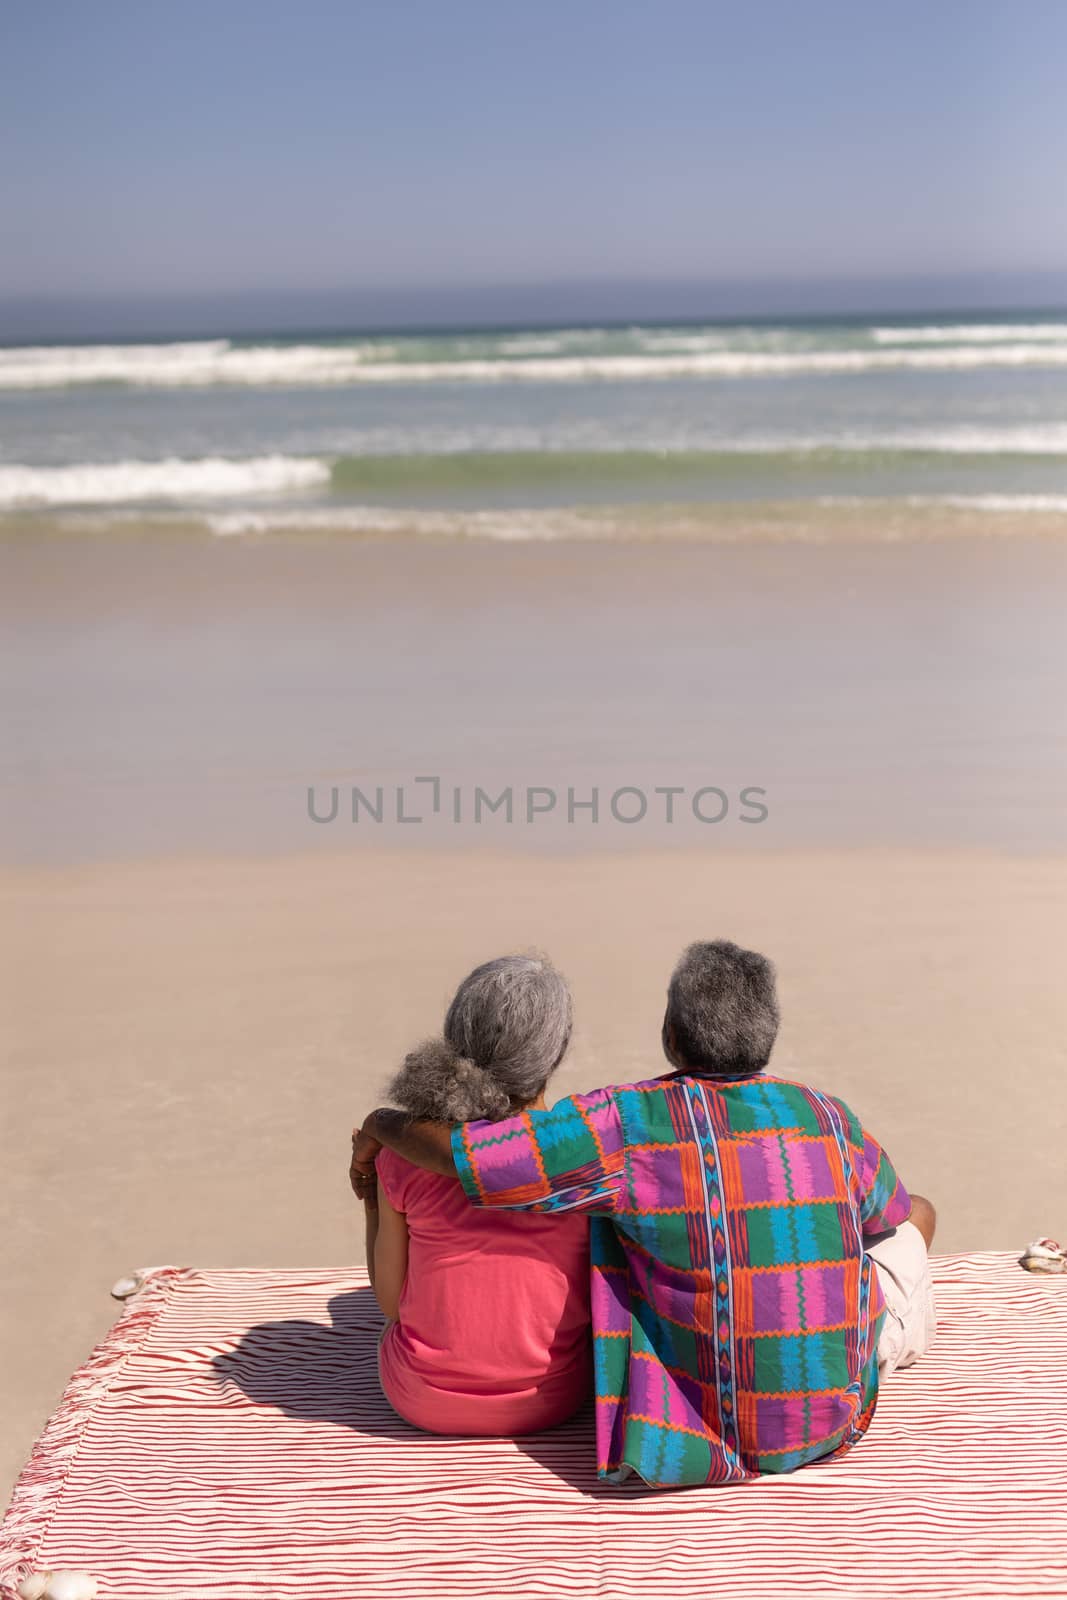 Rear view of senior couple sitting on blanket at beach in the sunshine